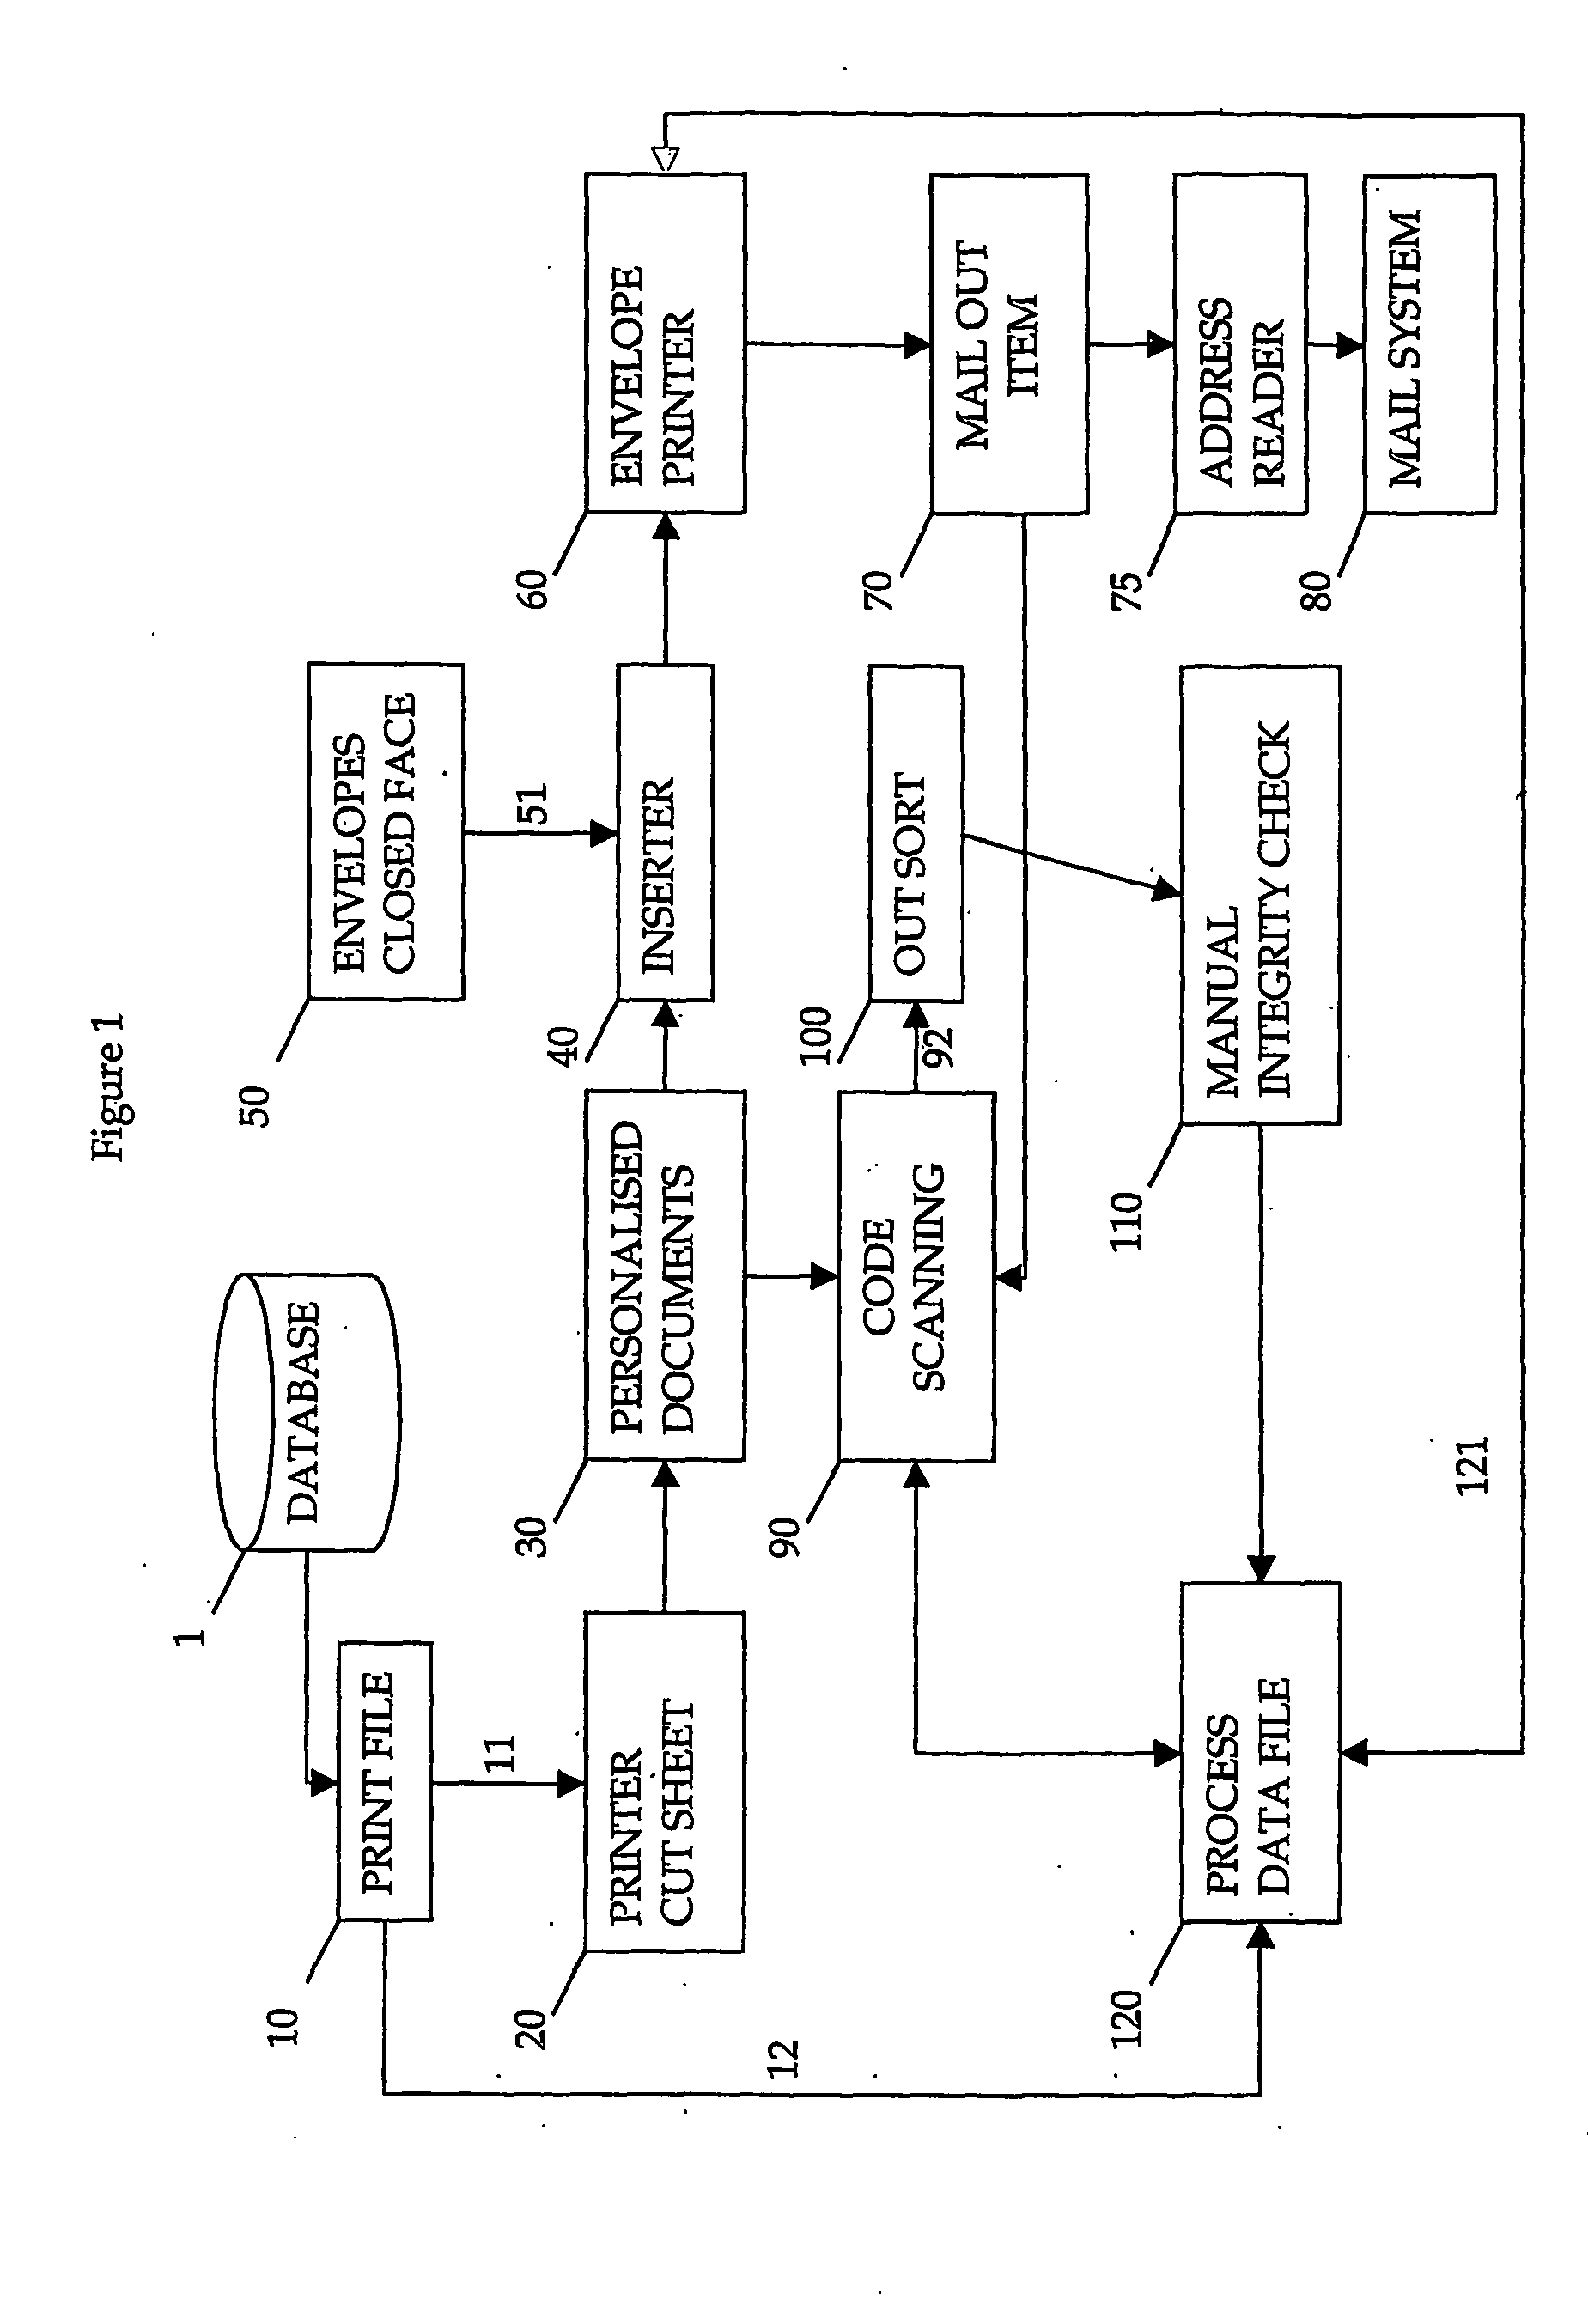 Method and apparatus for forming a document set